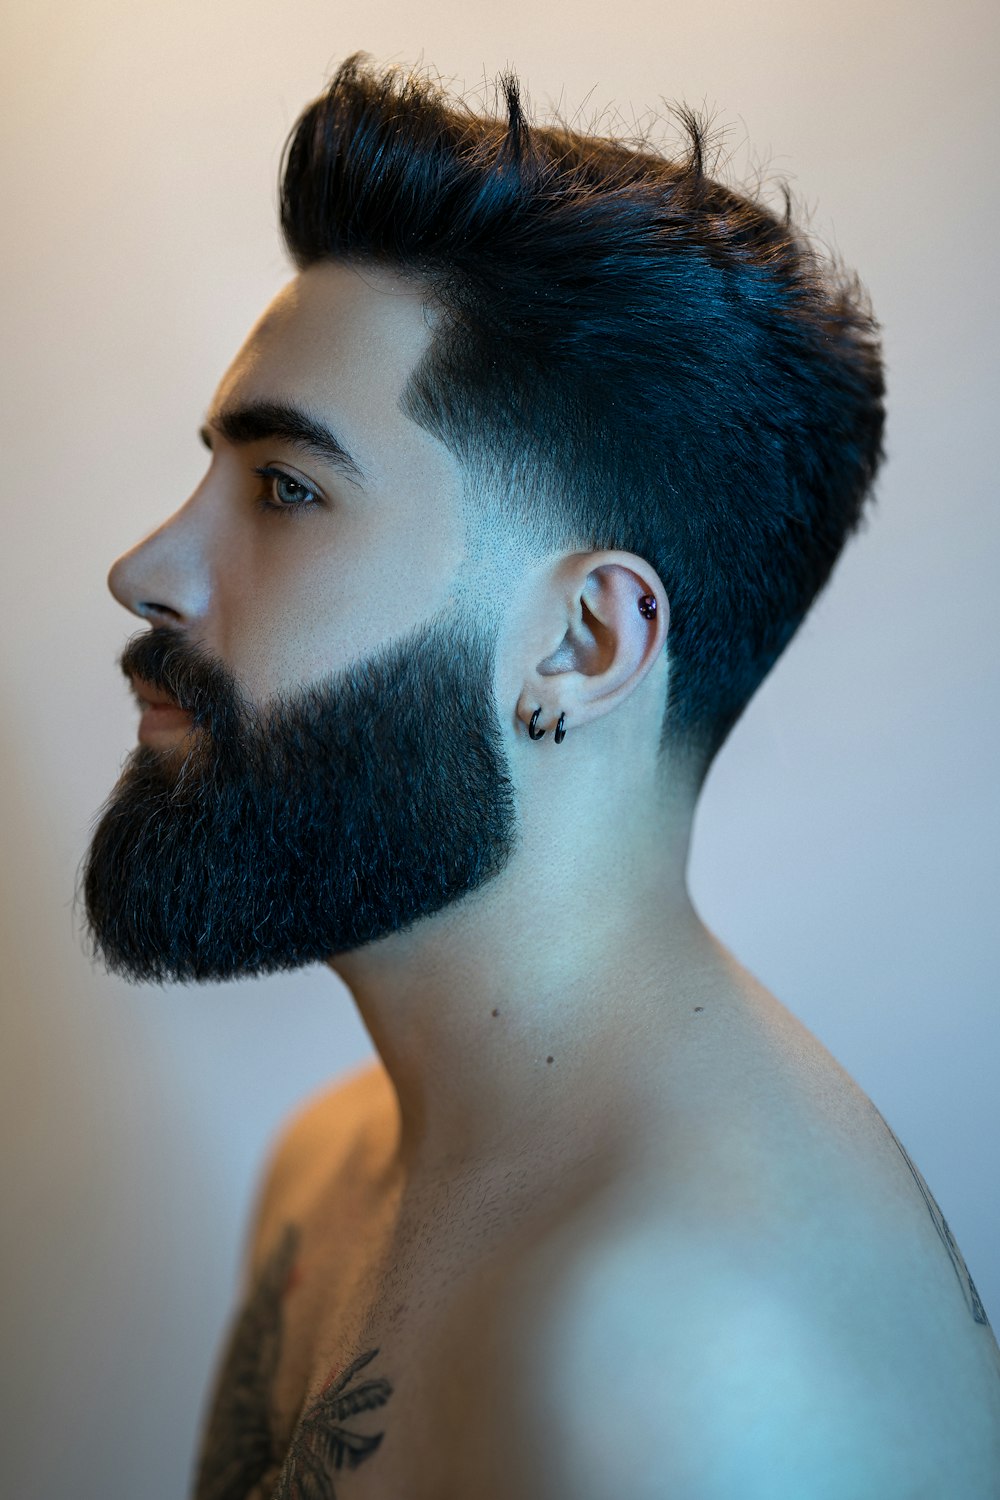 Hairstyling for Men: All the Cool Hair Cuts